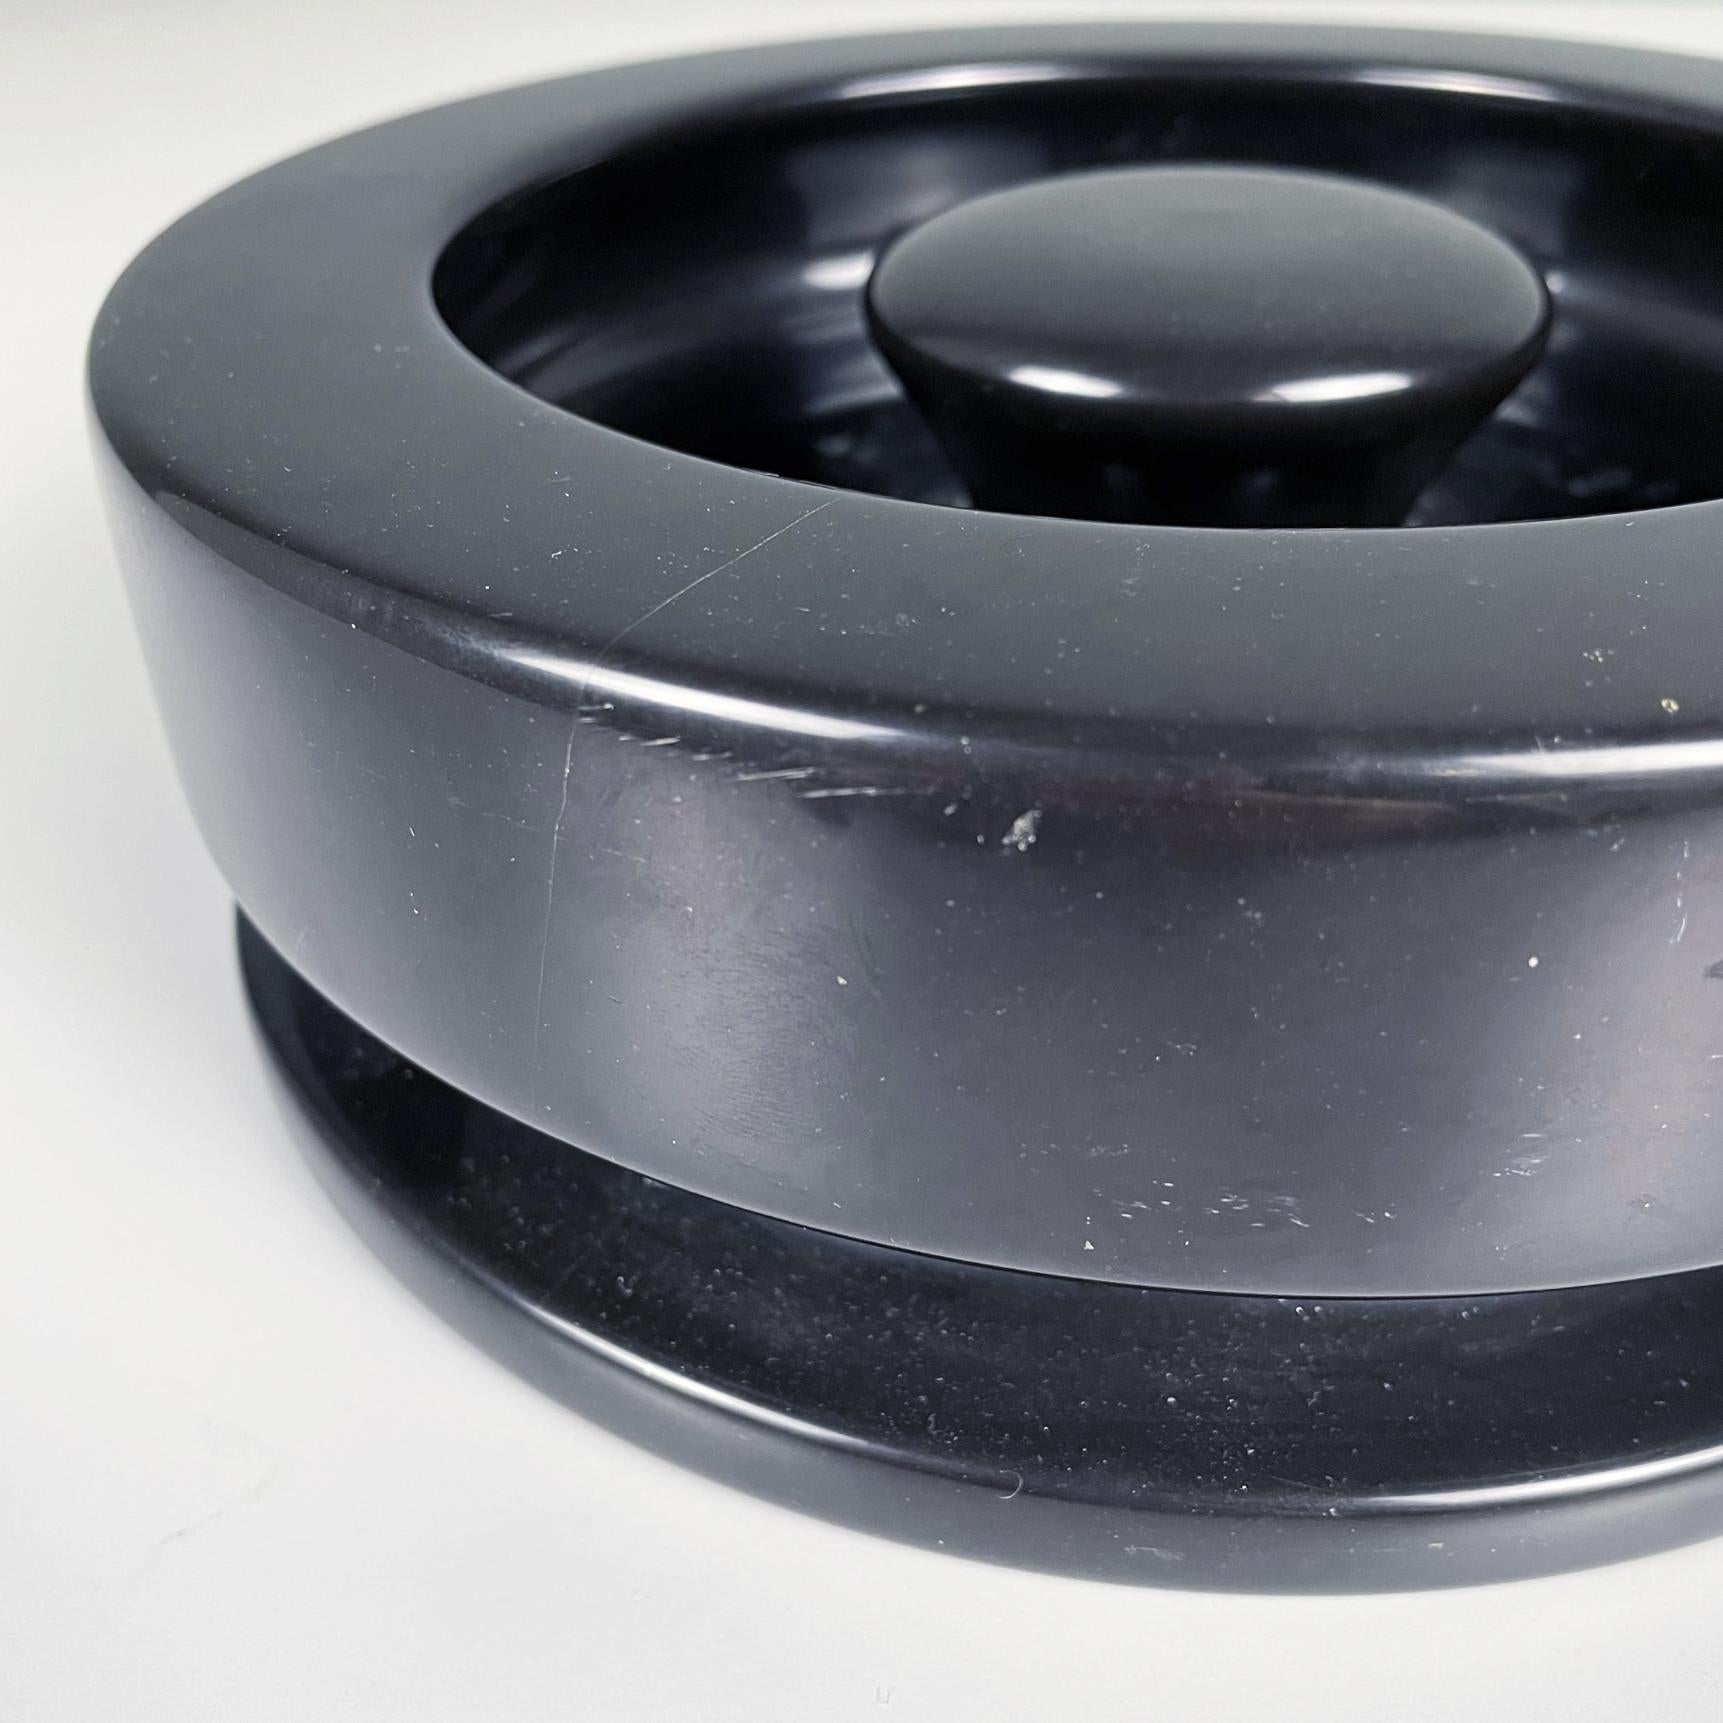 Late 20th Century USA Modern Black Marble Ashtray 8532 by Angelo Mangiarotti for Knoll, 1970s For Sale